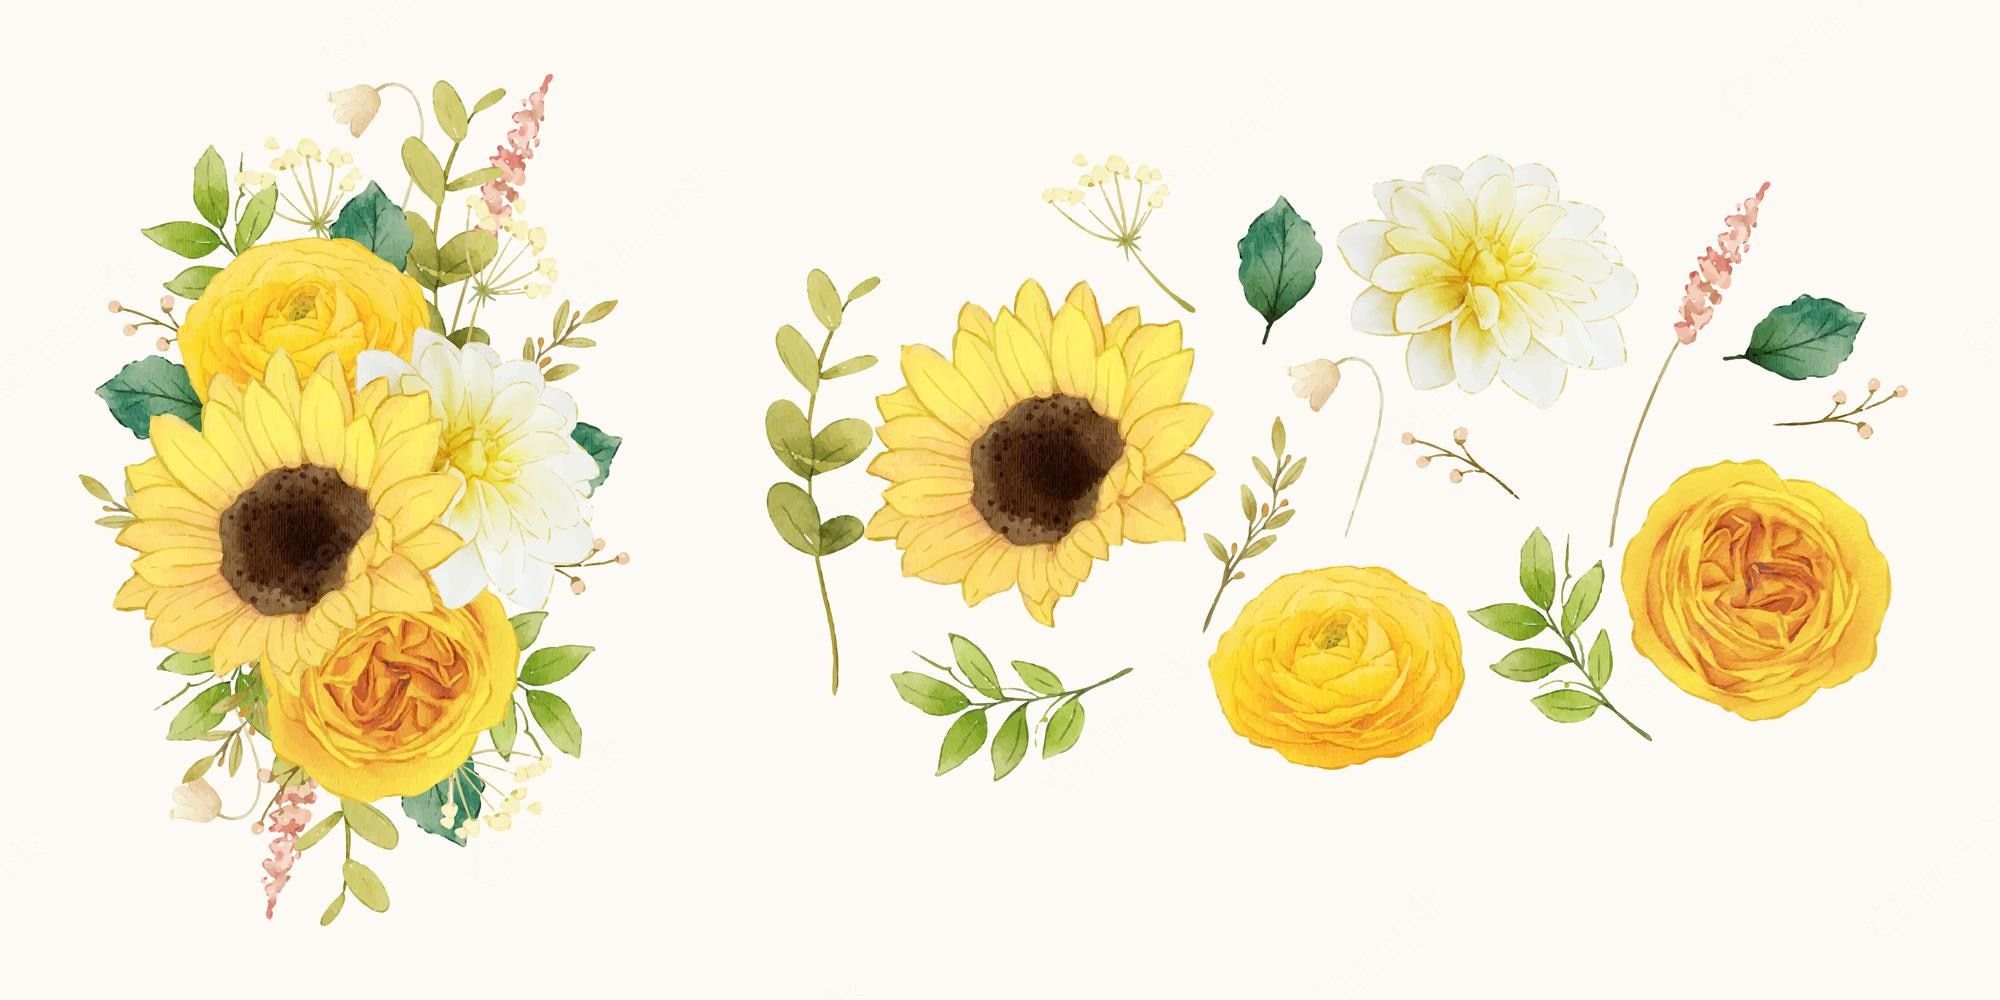 A collection of yellow flowers and leaves. - Sunflower